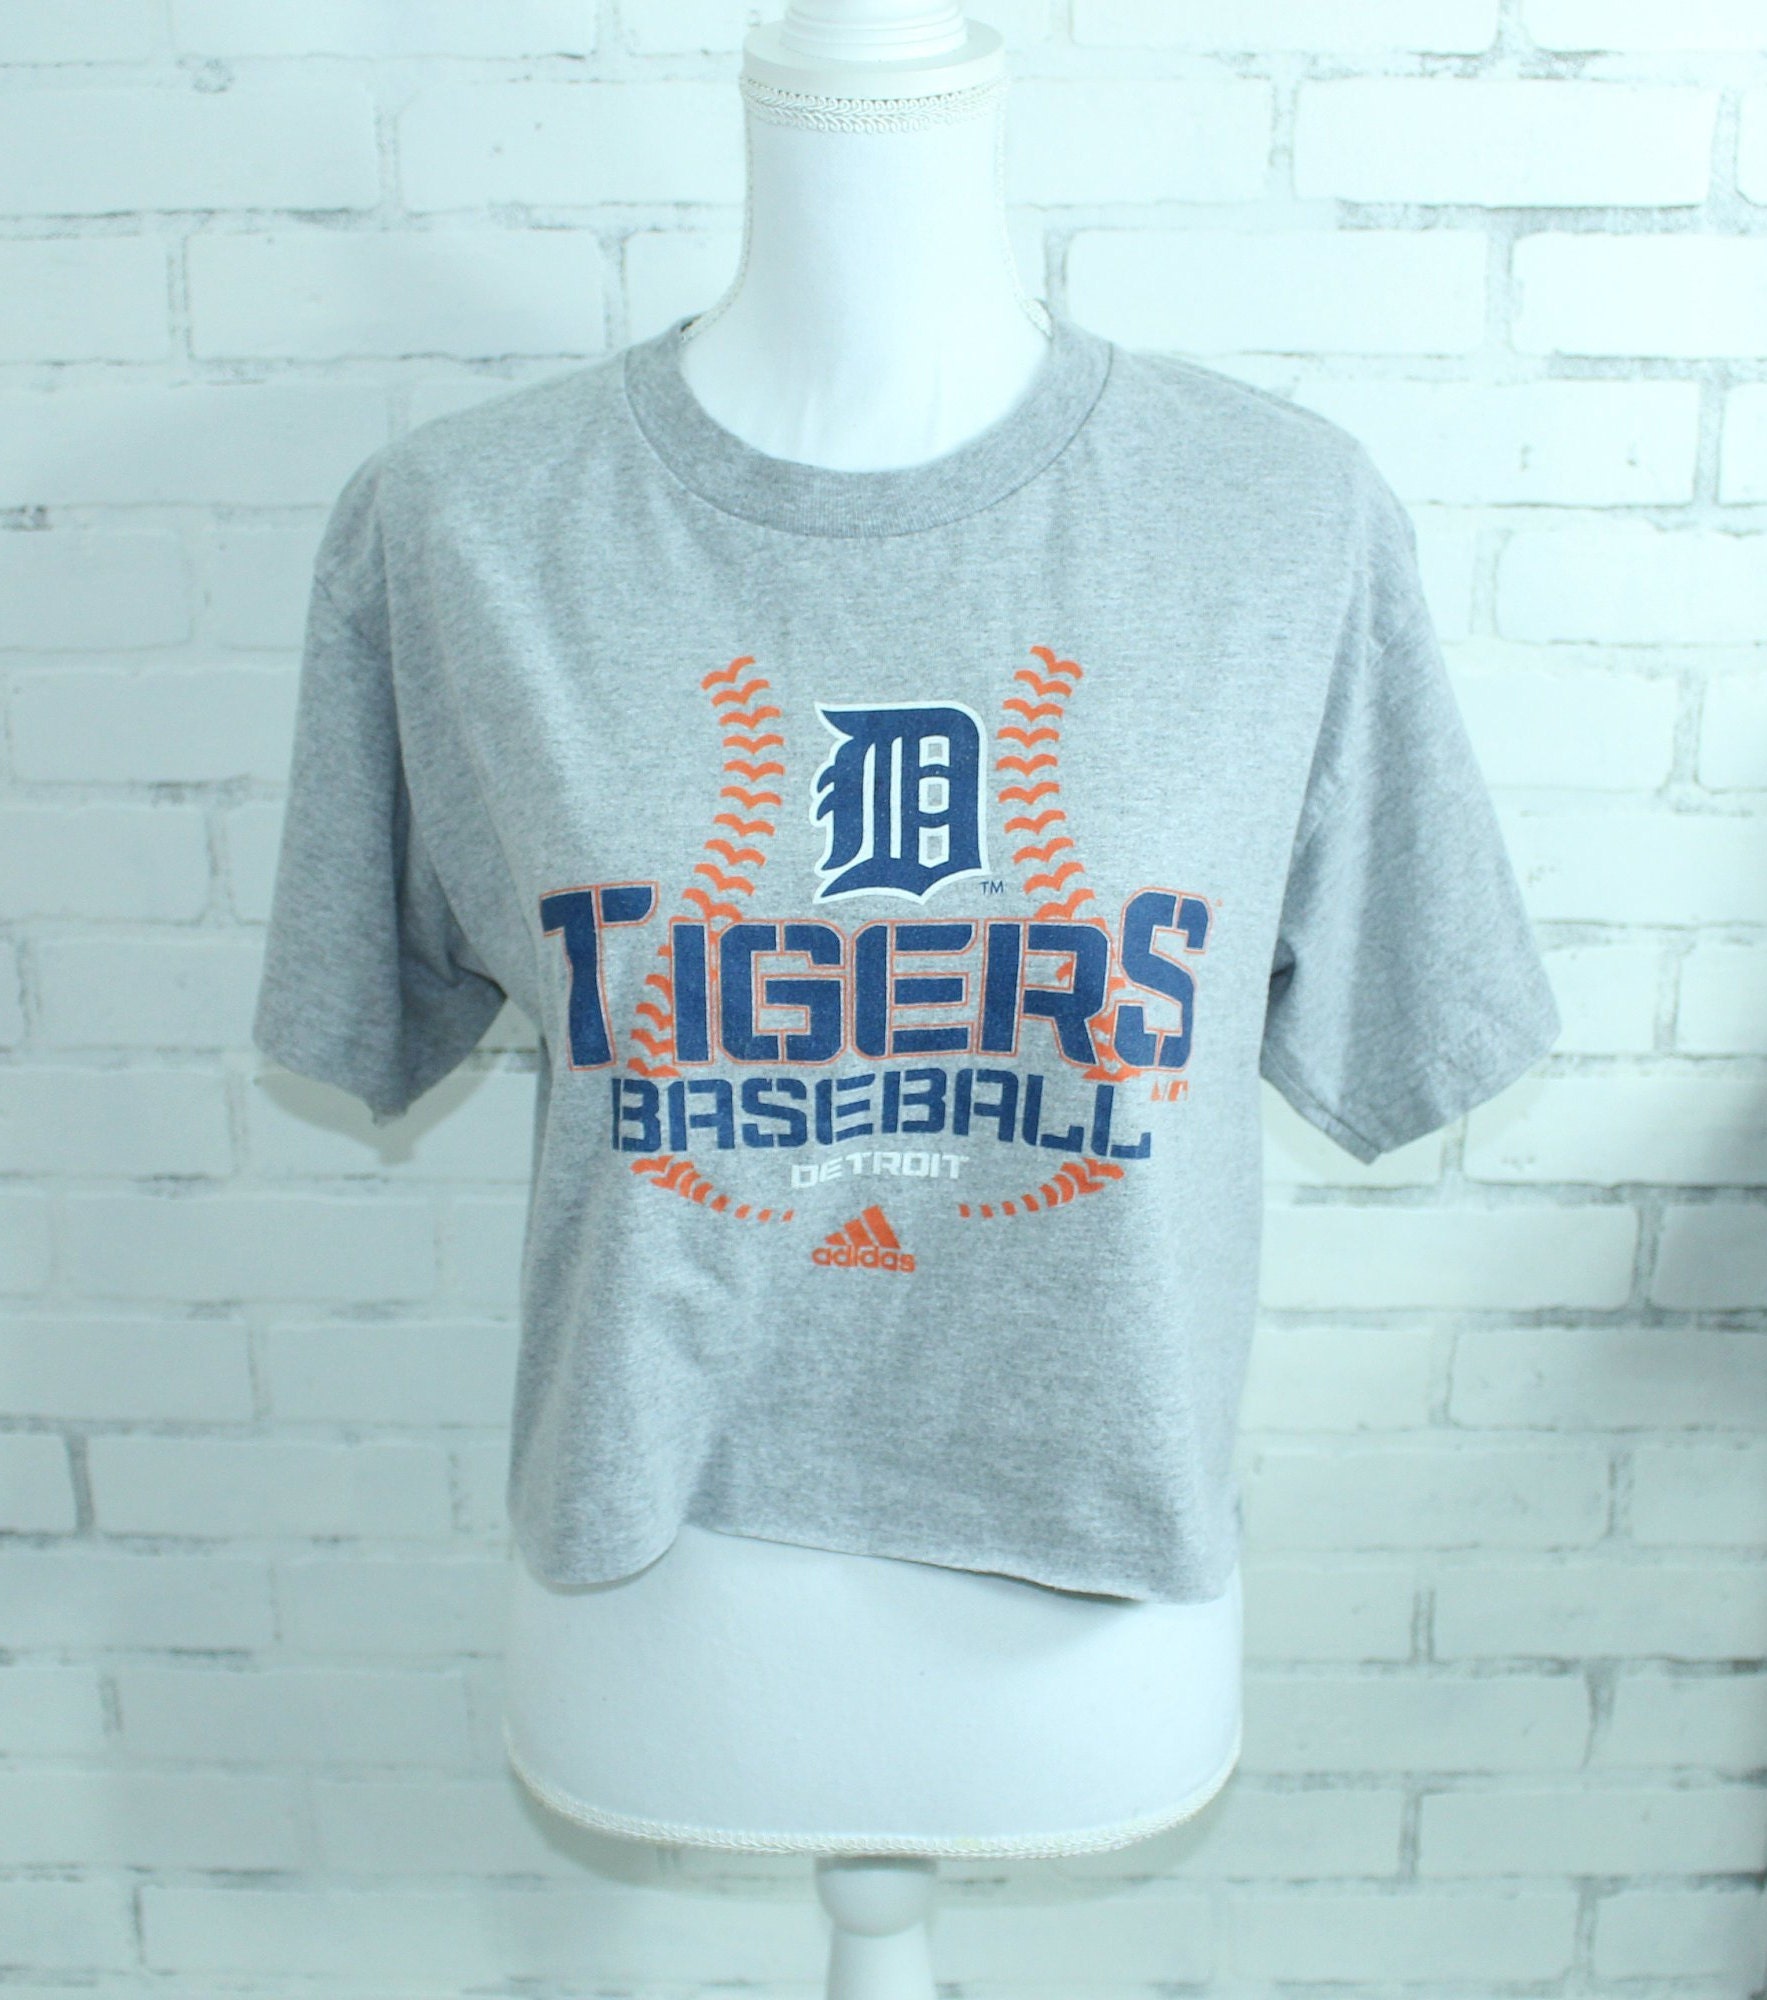 Detroit Tigers Baseball Vintage Graphic t-shirt (RARE one of a kind)